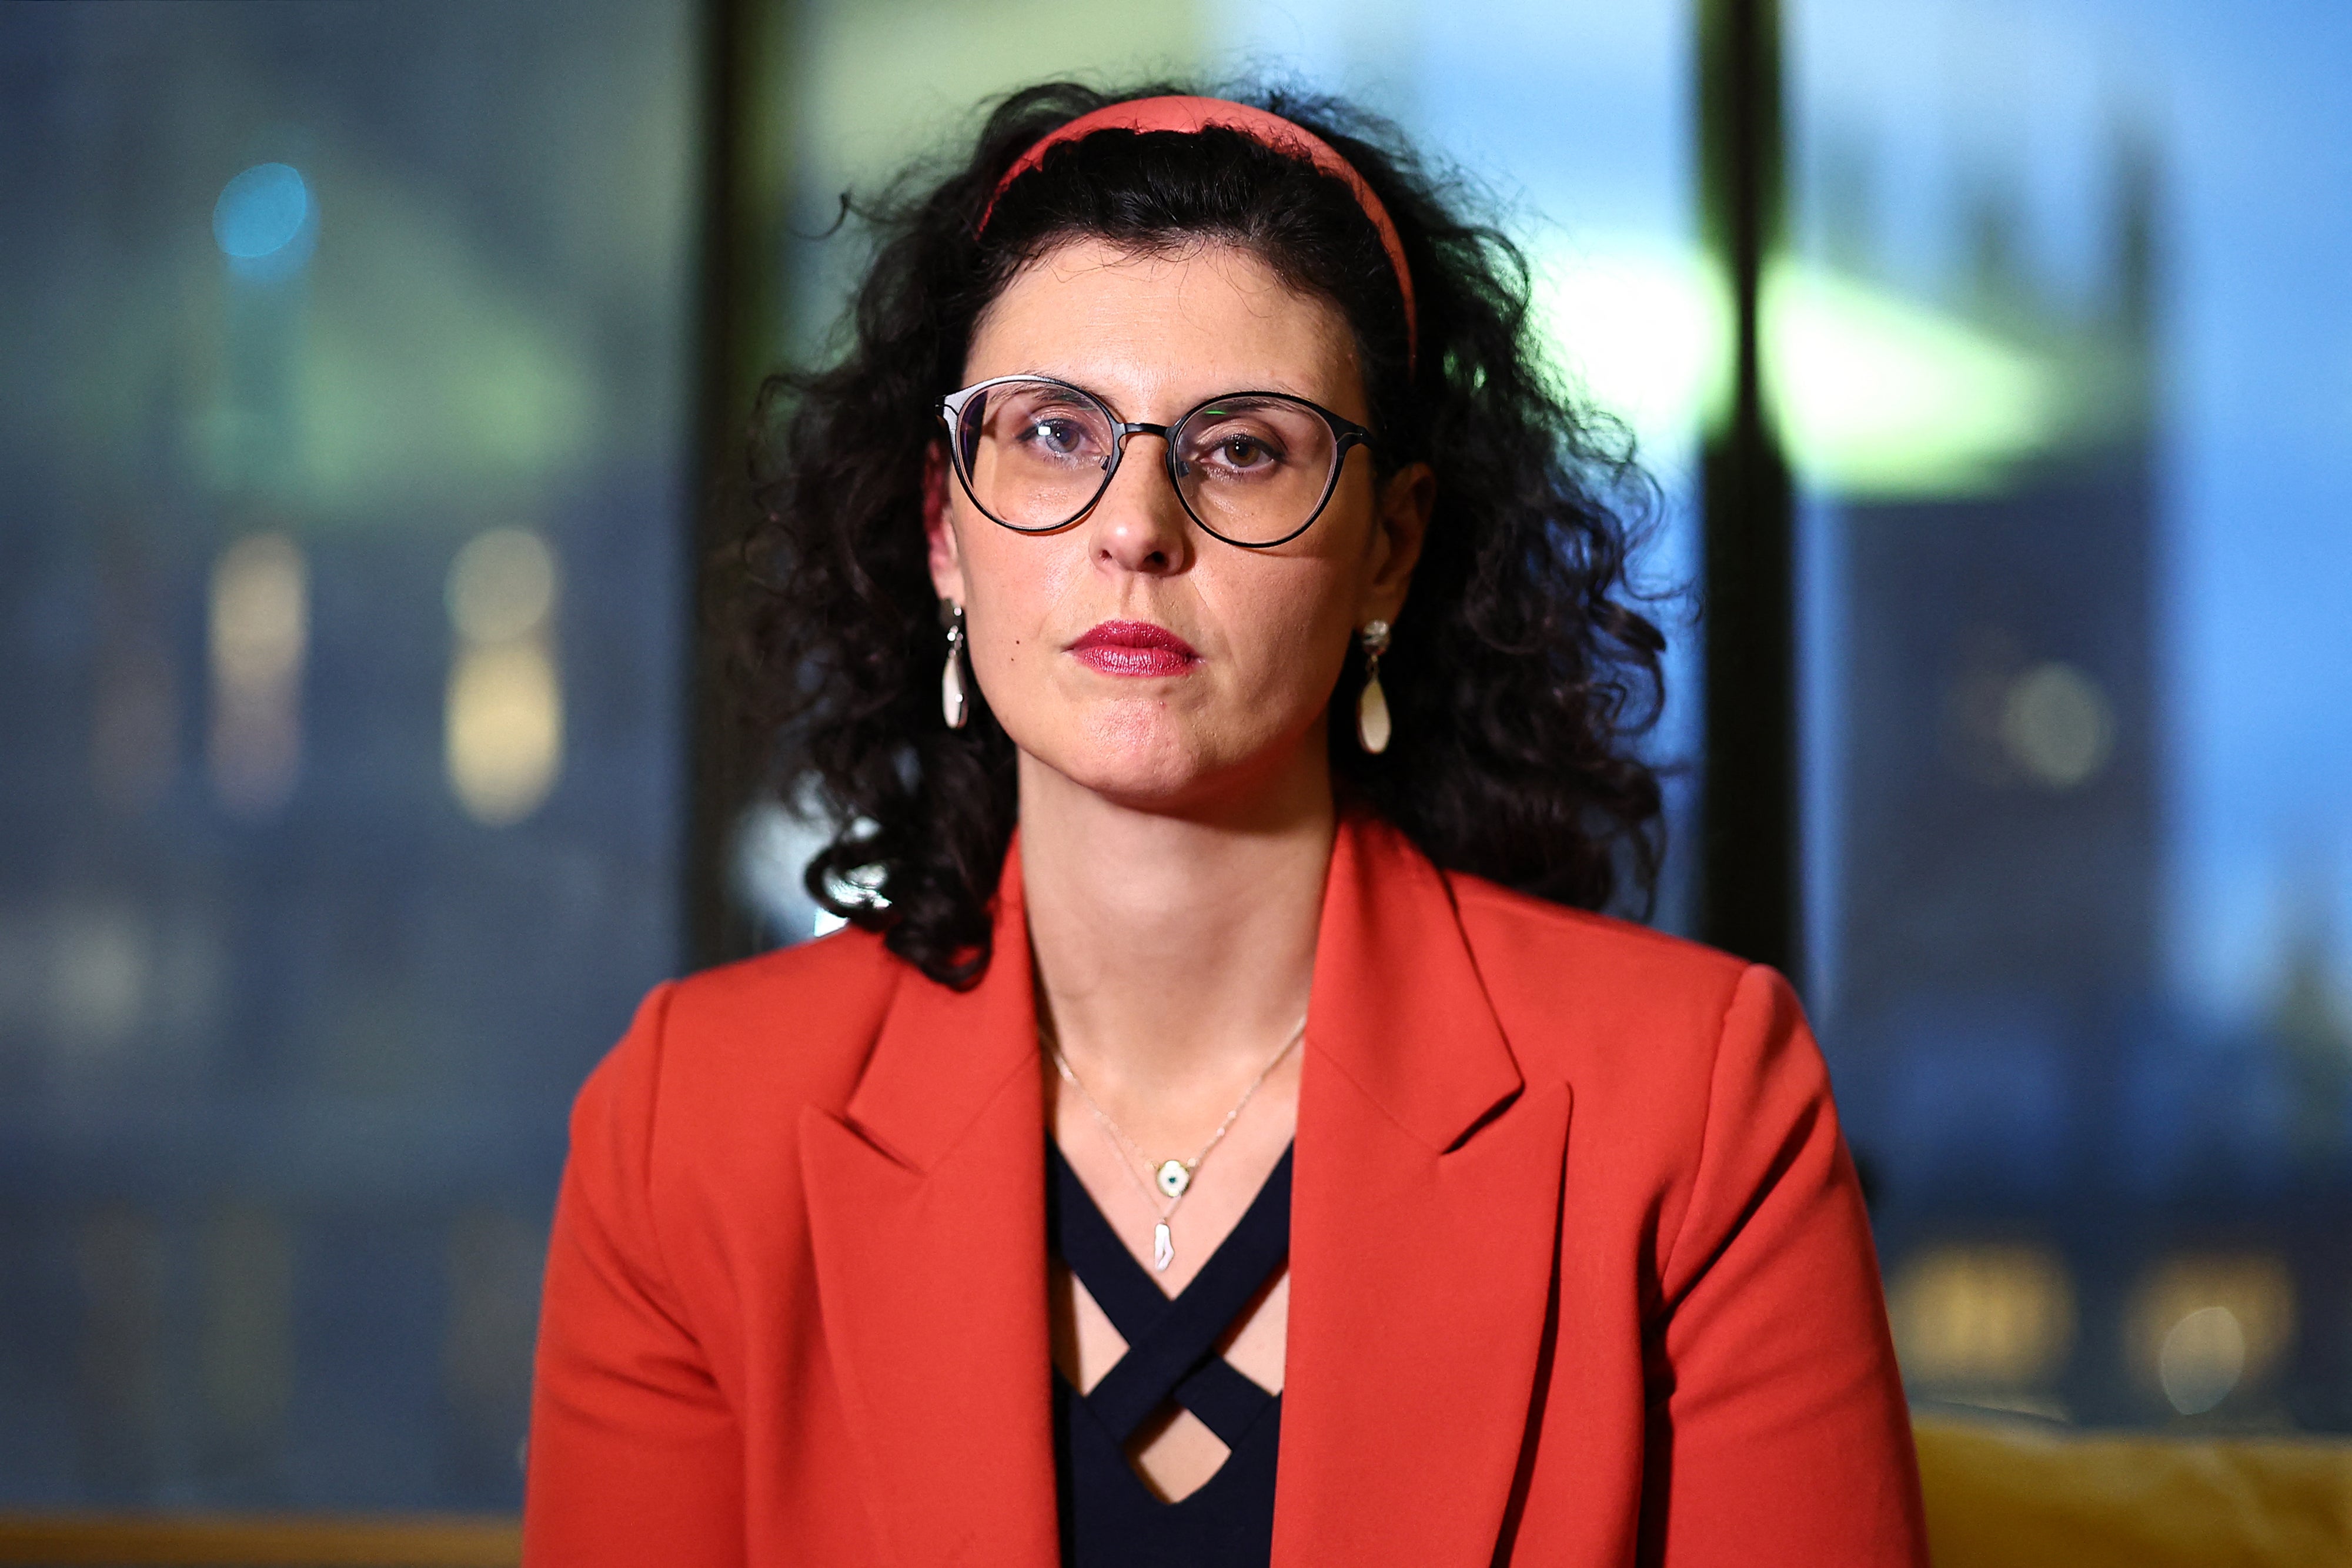 Layla Moran said suspending arms sales to Israel would send a ‘powerful message’ to the US and Israel